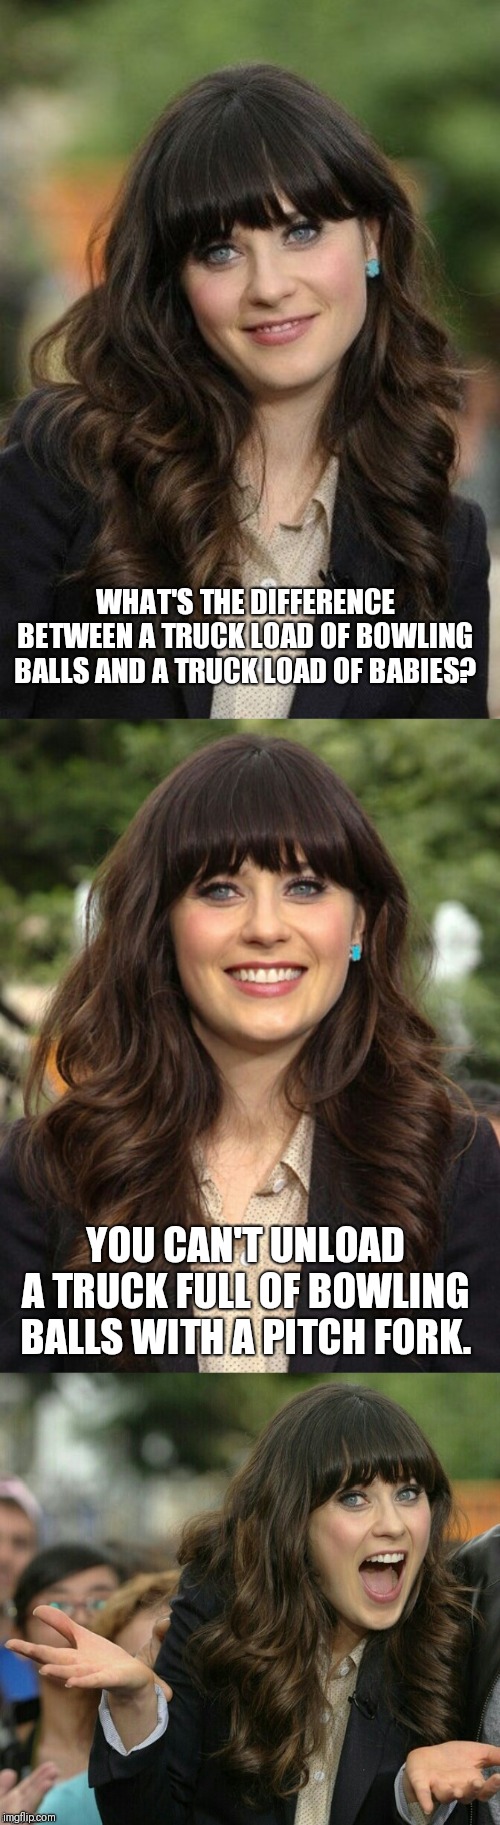 An ex girlfriend's humor. | WHAT'S THE DIFFERENCE BETWEEN A TRUCK LOAD OF BOWLING BALLS AND A TRUCK LOAD OF BABIES? YOU CAN'T UNLOAD A TRUCK FULL OF BOWLING BALLS WITH A PITCH FORK. | image tagged in zooey deschanel joke template | made w/ Imgflip meme maker